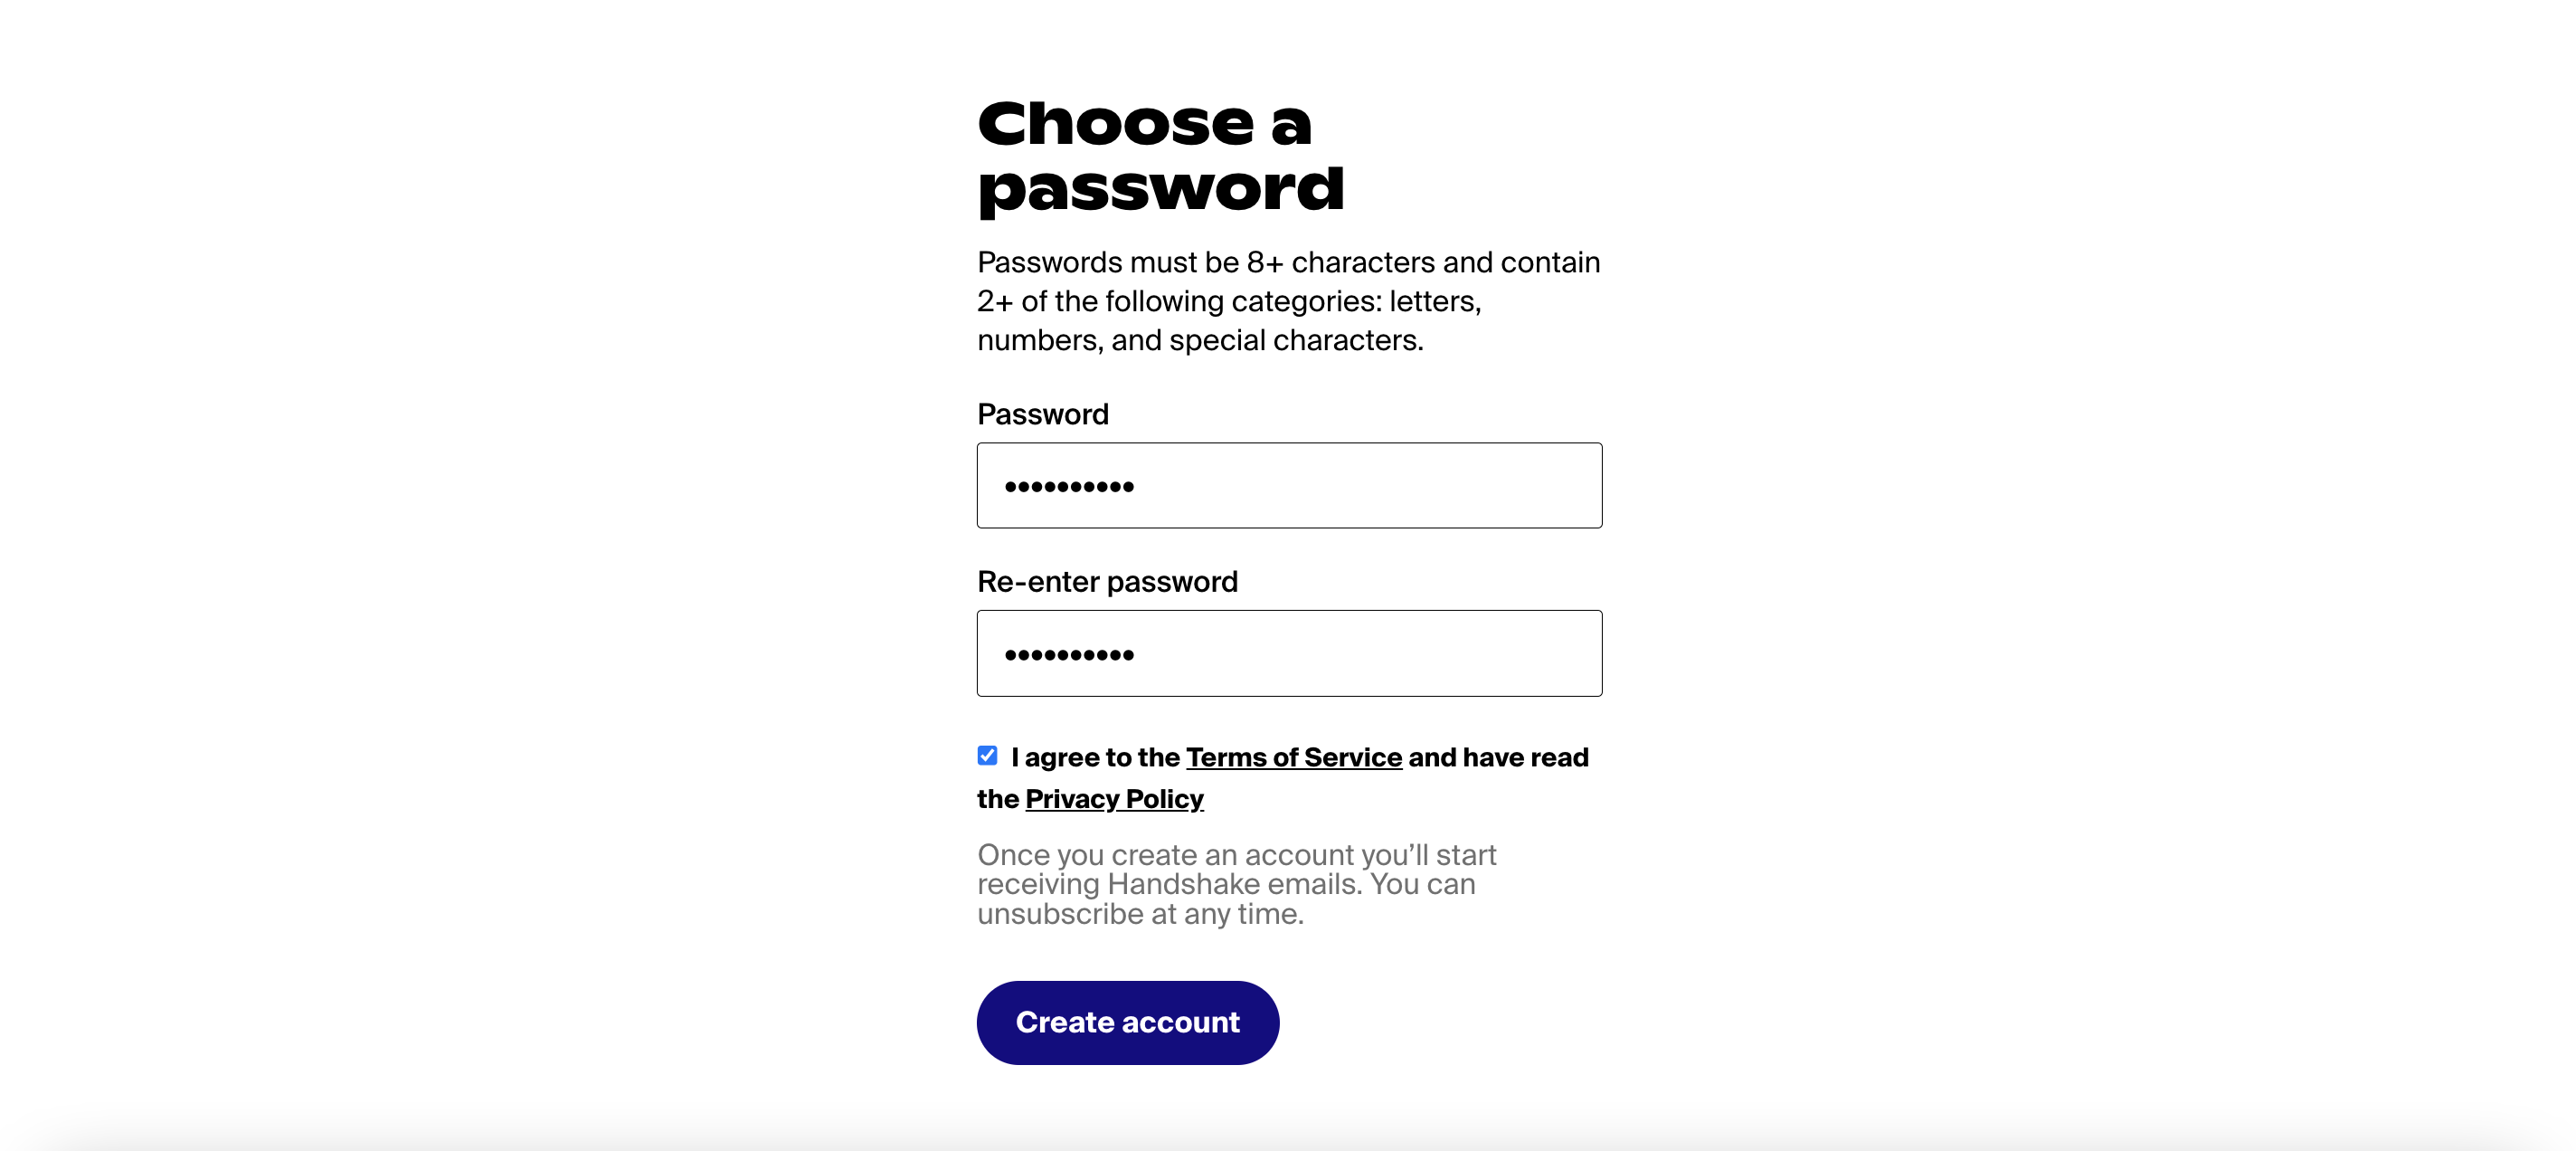 Choose_Password_Student_Account_Image.png